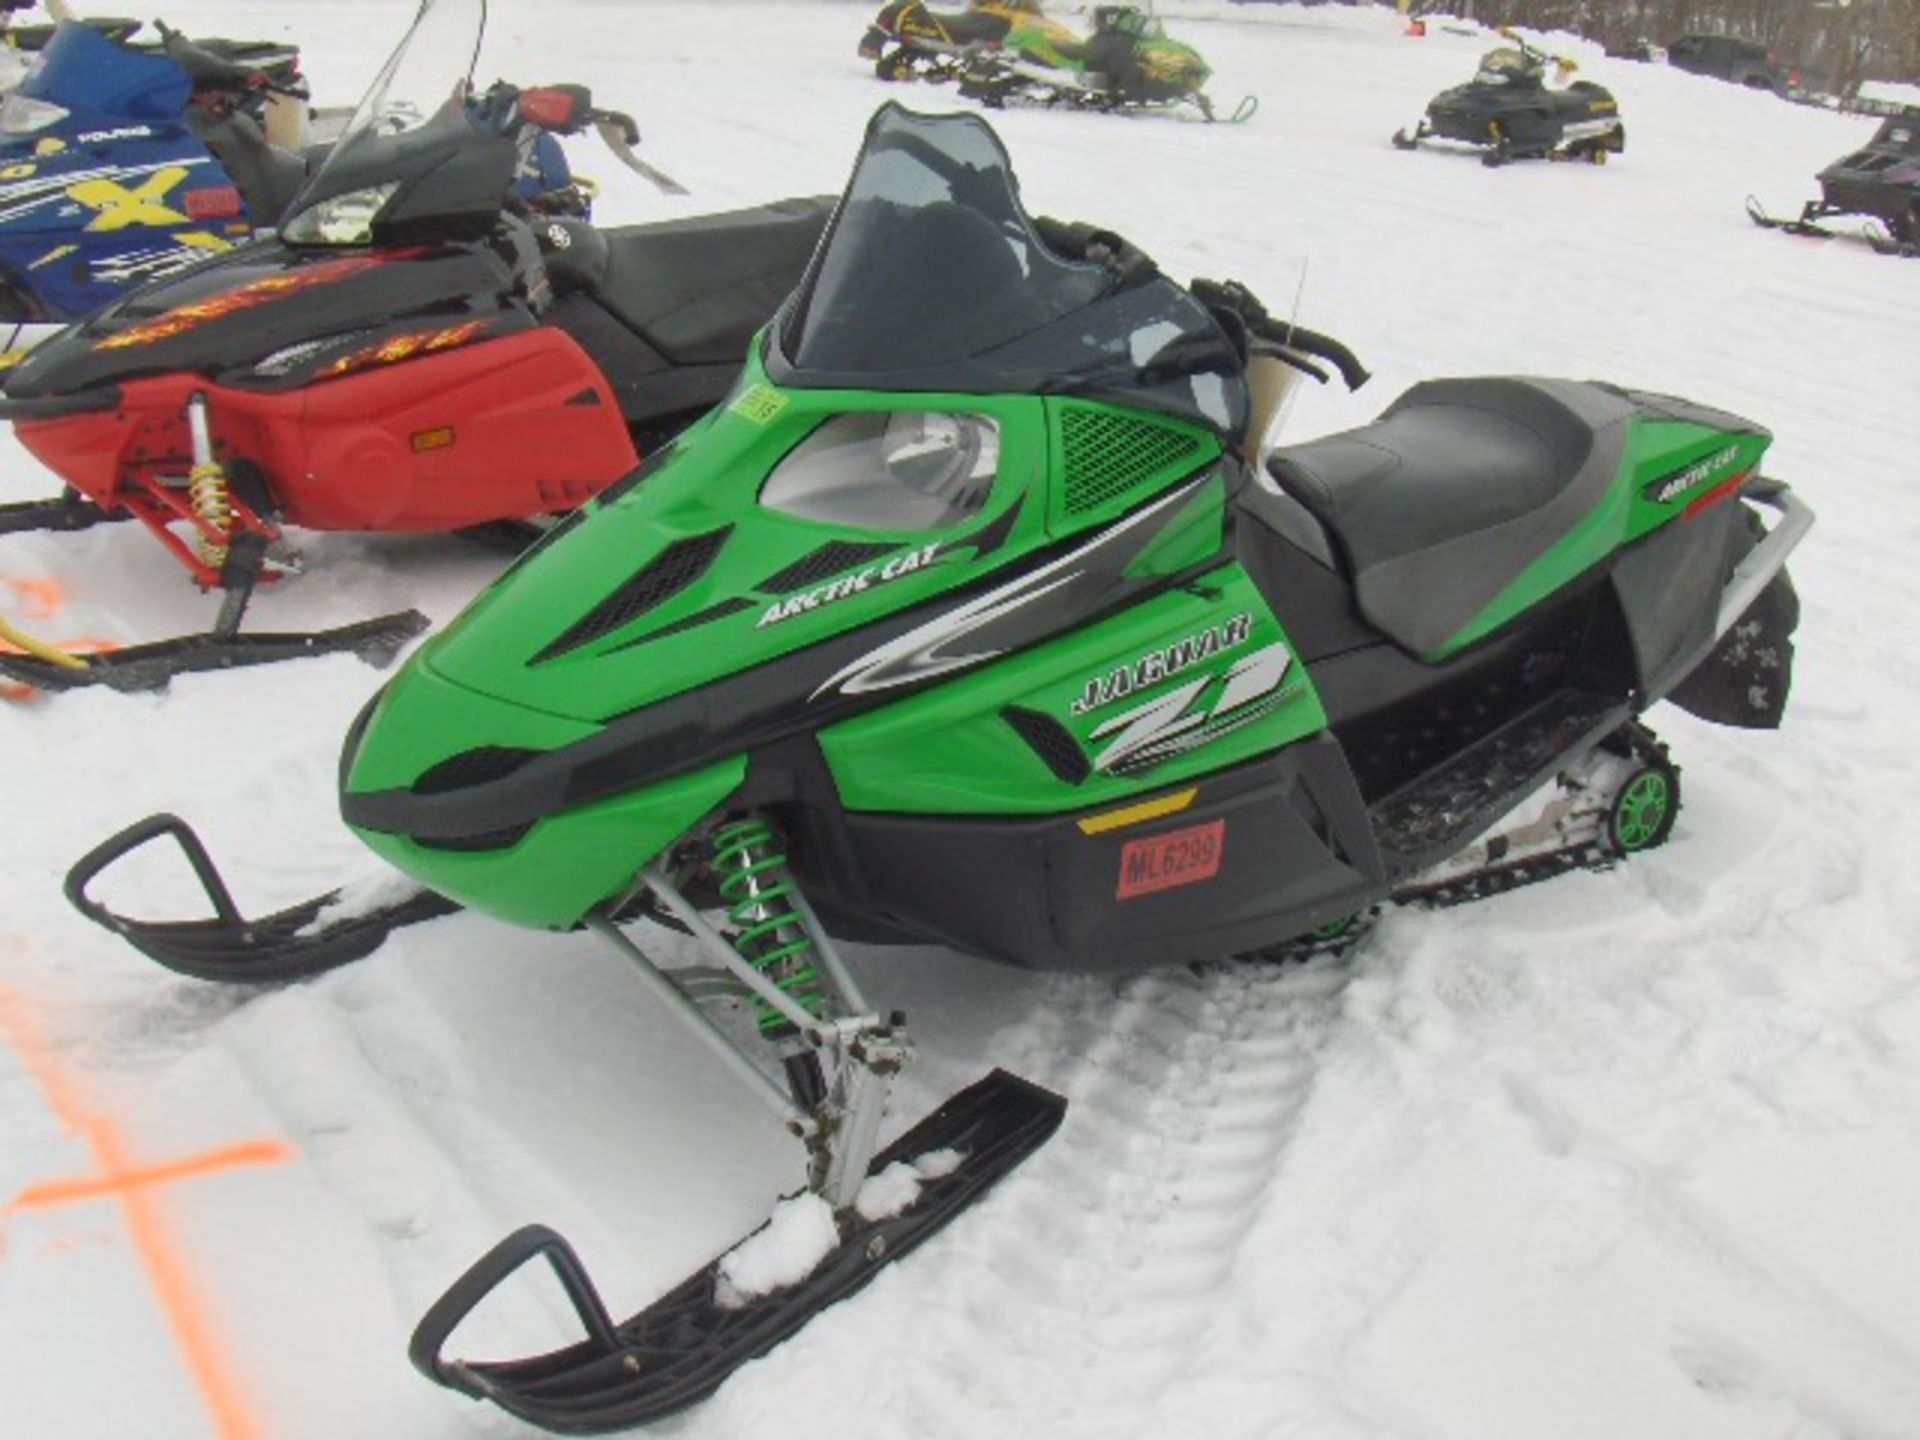 2007 ARCTIC CAT 1100 Z 1 JAGUAR  4UF07SNW77T115670 snowmobile, owner started at time of auction